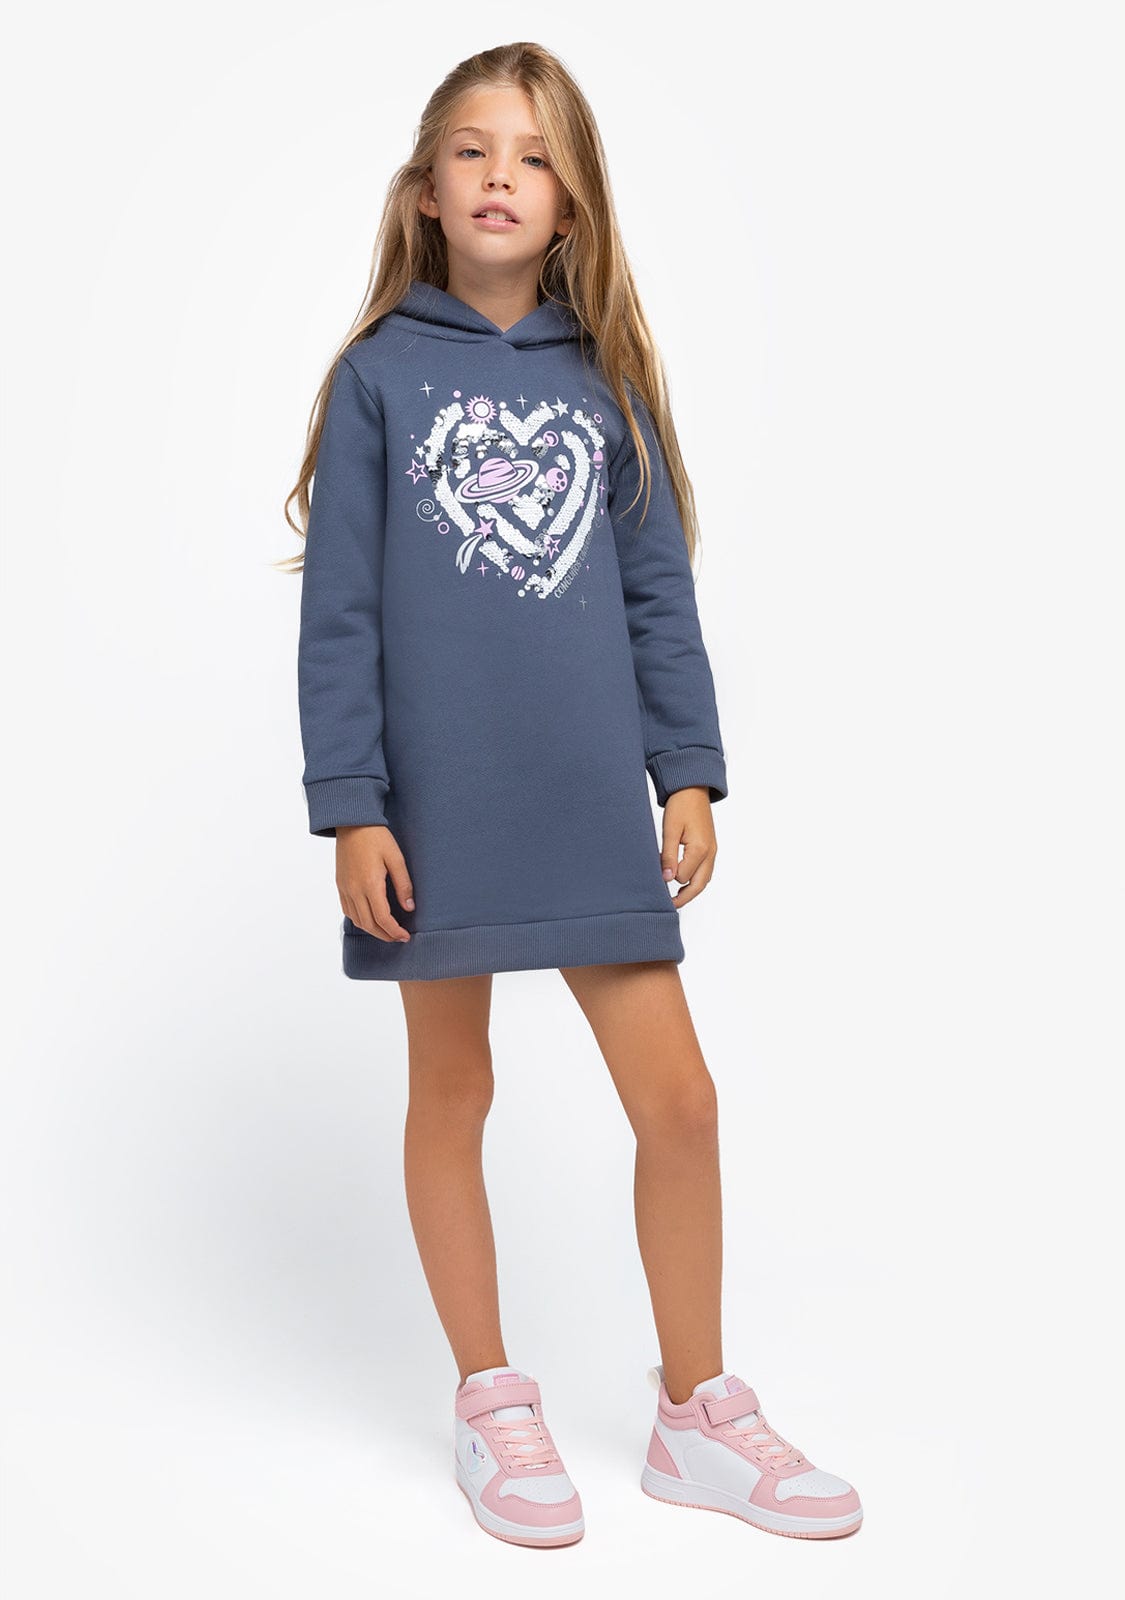 CONGUITOS TEXTIL Clothing Girl's Grey Hooded Dress